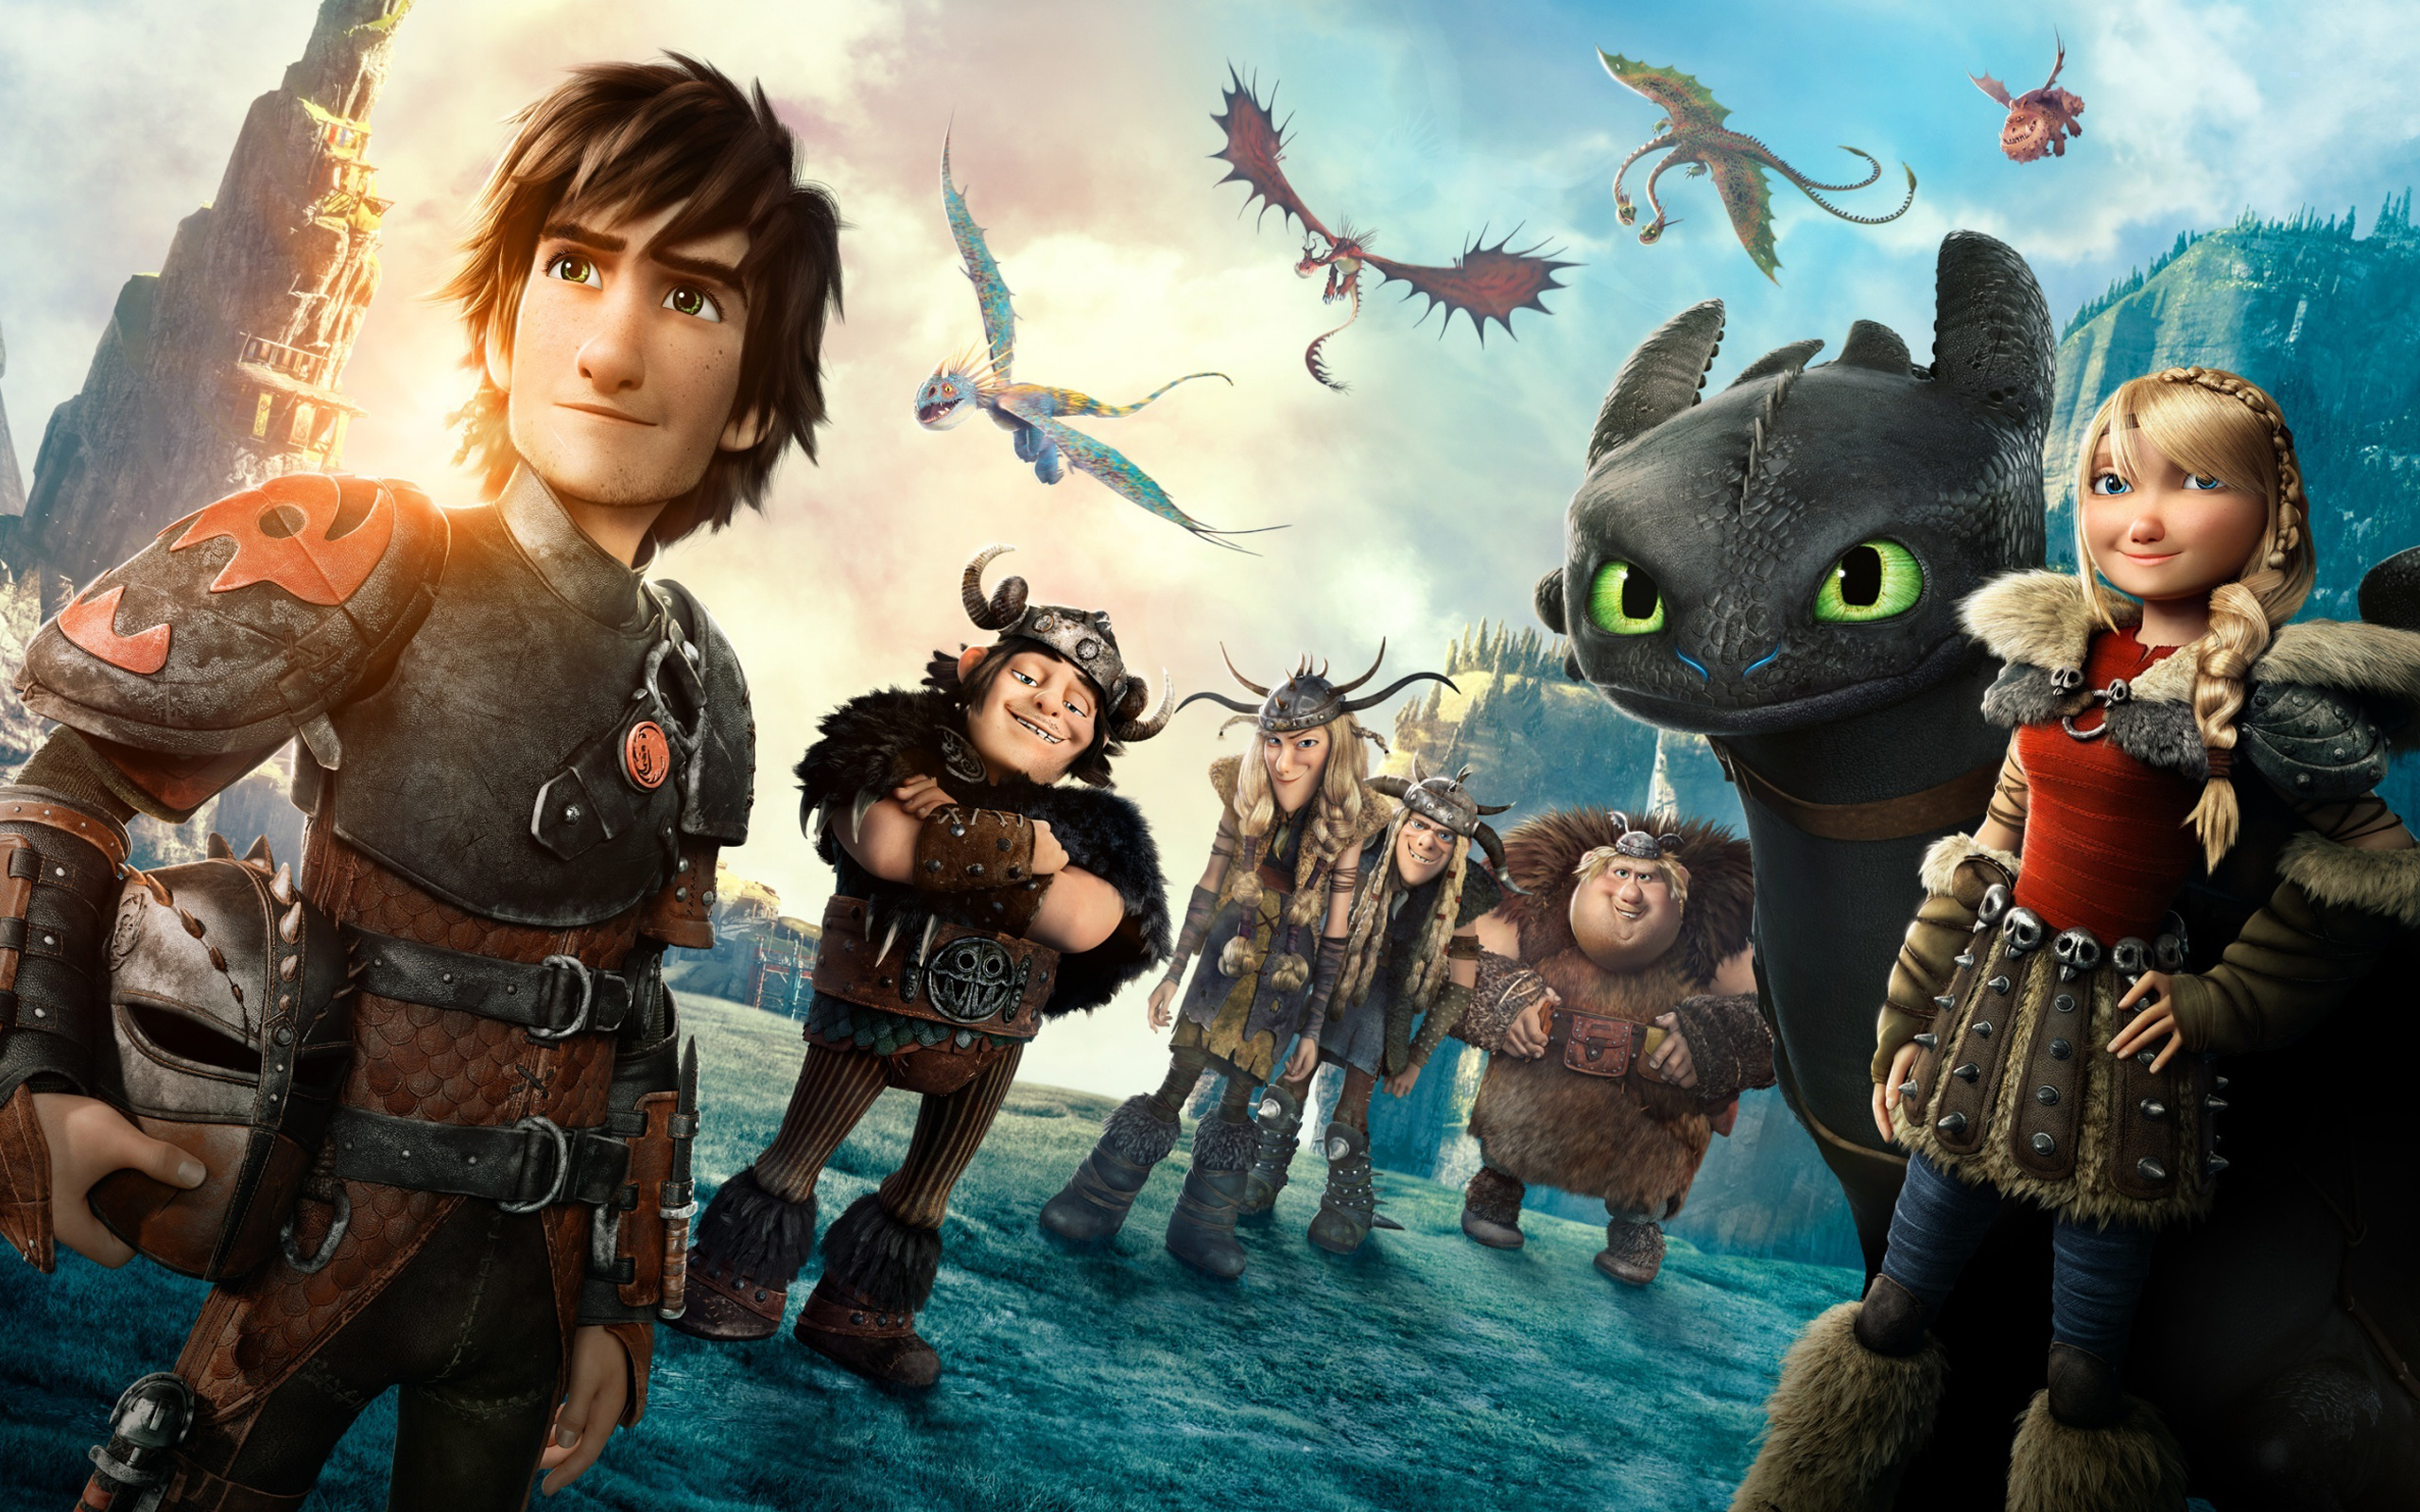 How To Train Your Dragon 2 Backgrounds, Compatible - PC, Mobile, Gadgets| 2560x1600 px